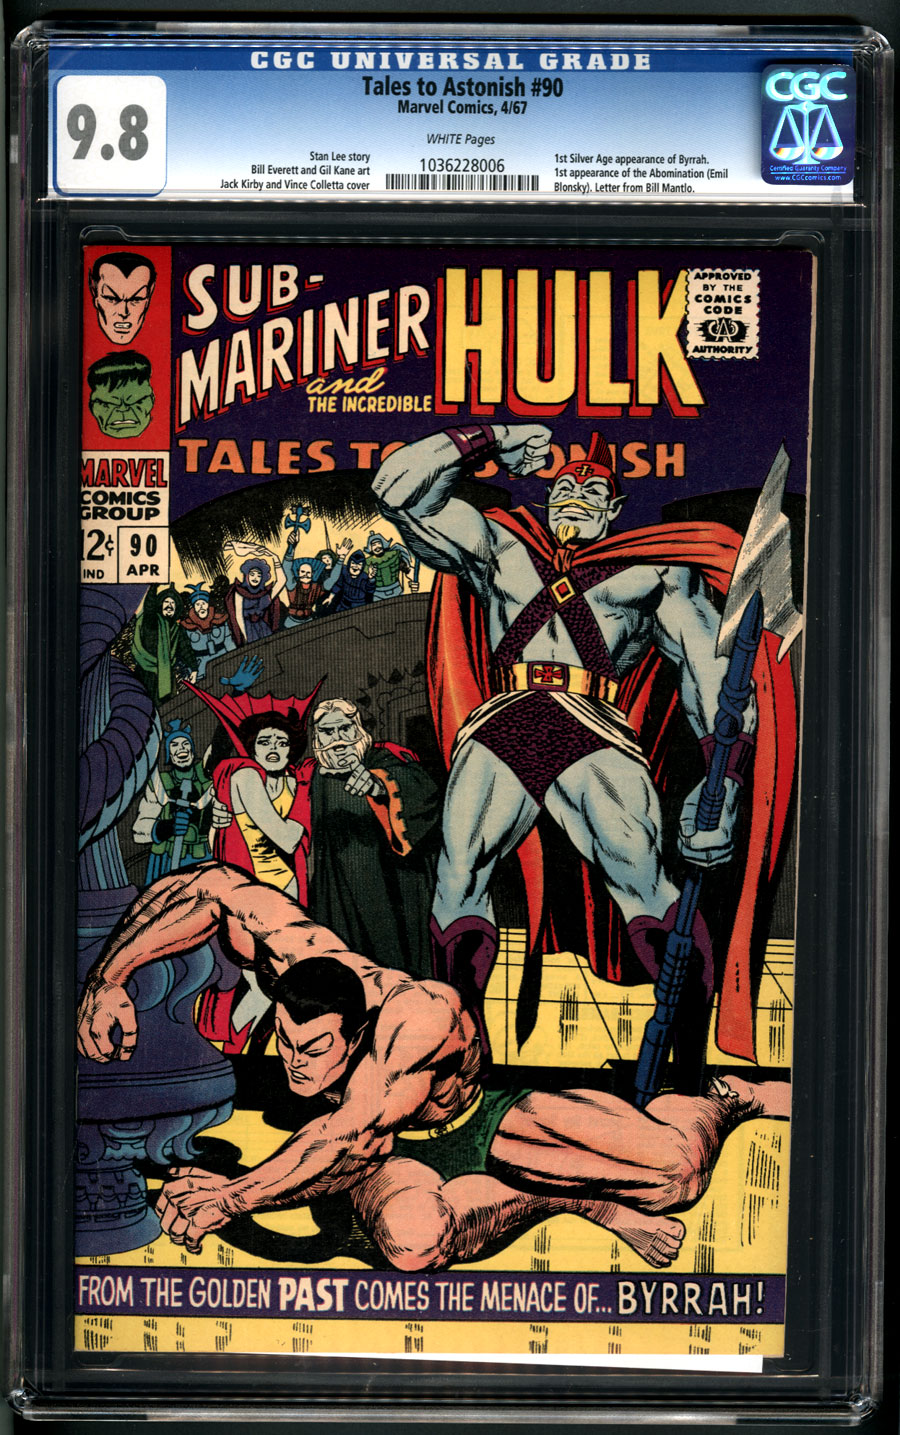 ComicConnect - TALES TO ASTONISH (1959-68) #90 - CGC NMM: 9.8